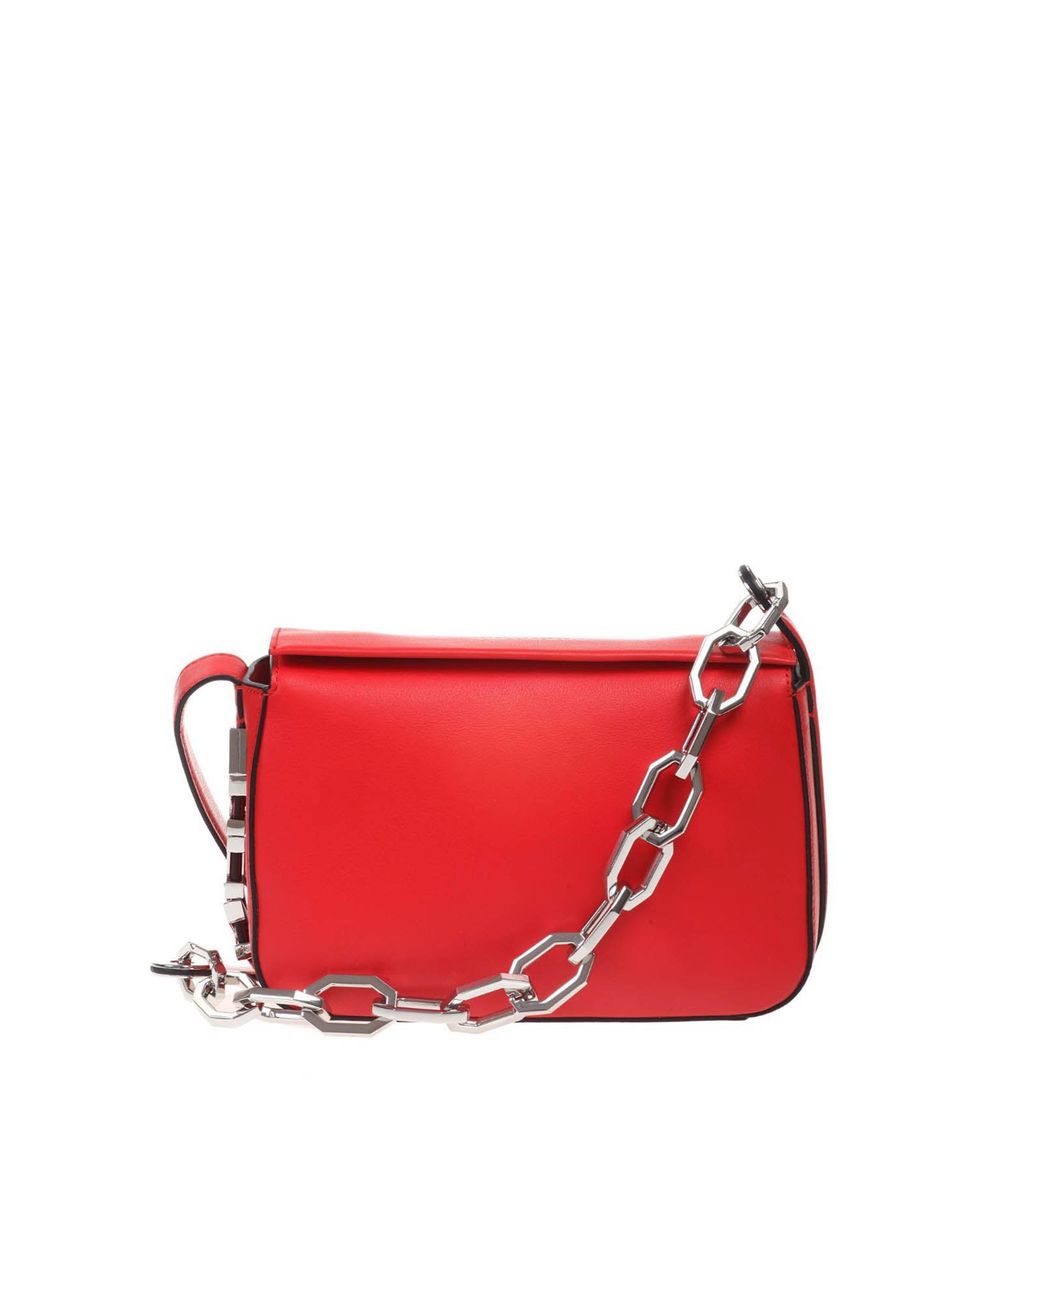 Karl Lagerfeld Leather Small K/letters Bag in Red - Lyst